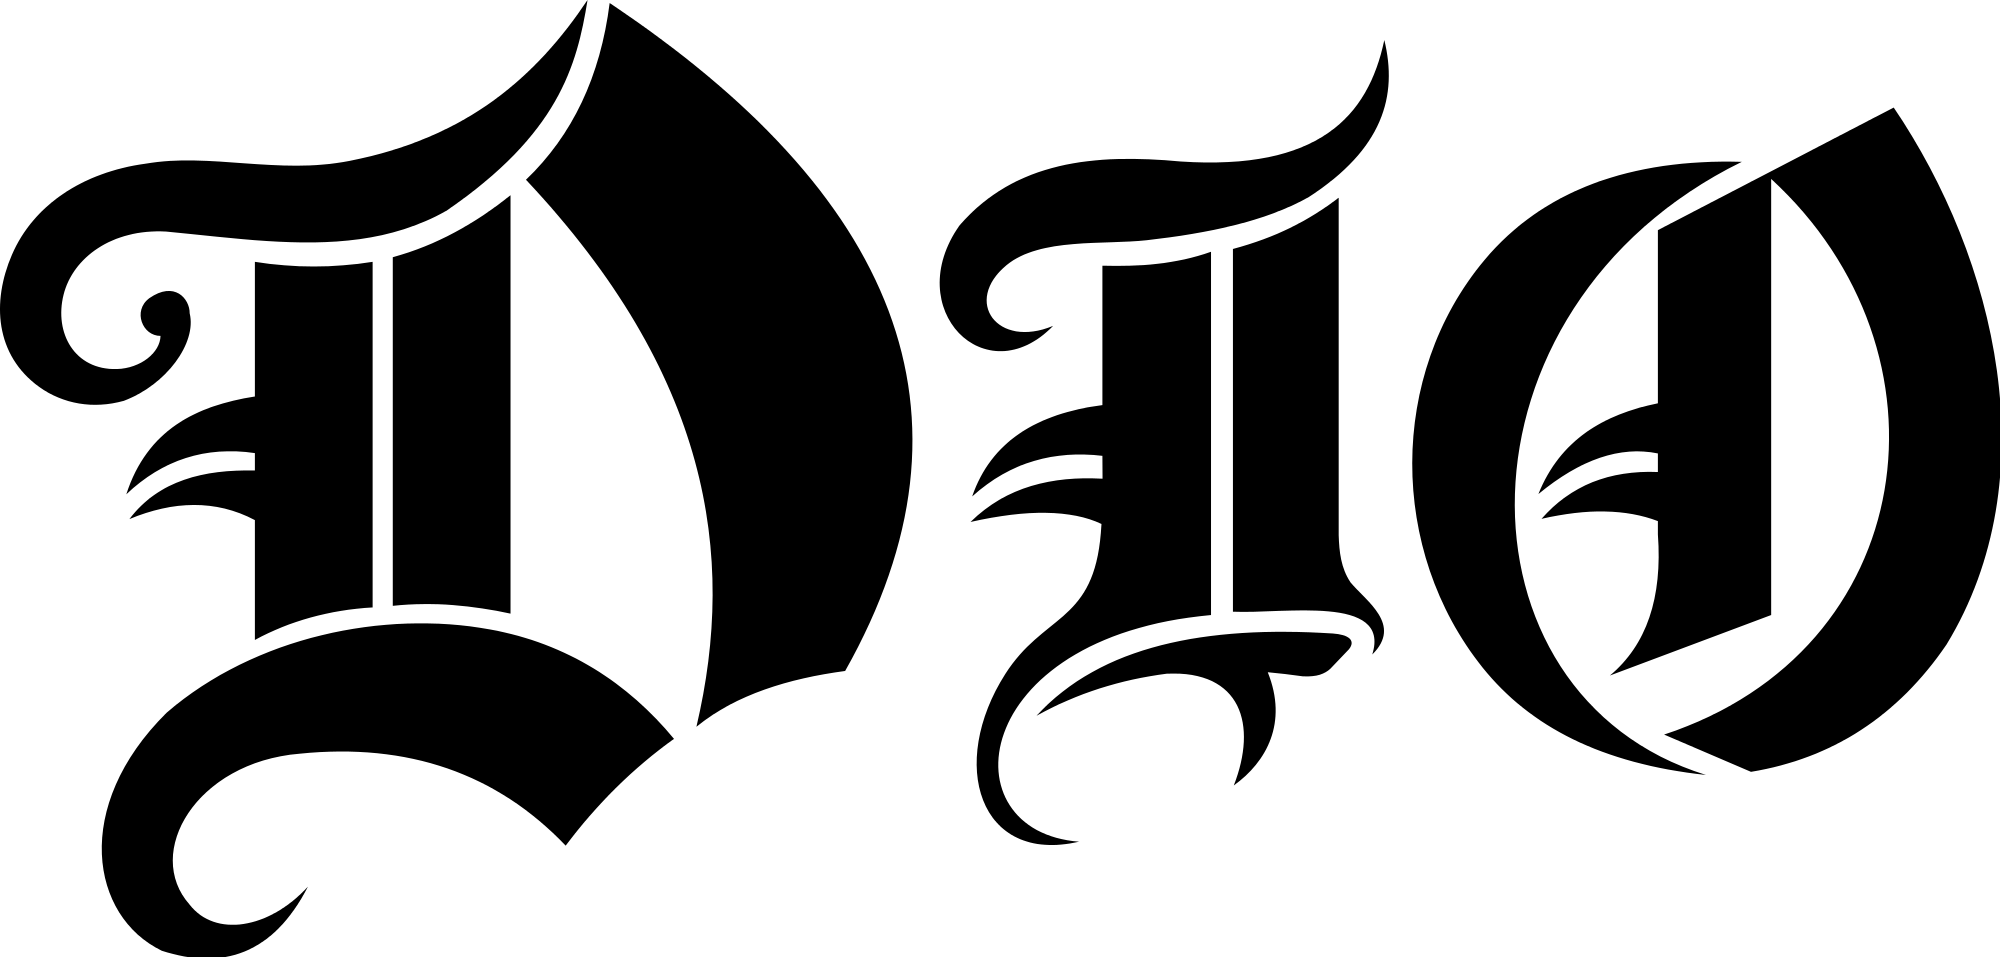 Other Band Logo - File:DIO (band) logo.svg - Wikimedia Commons